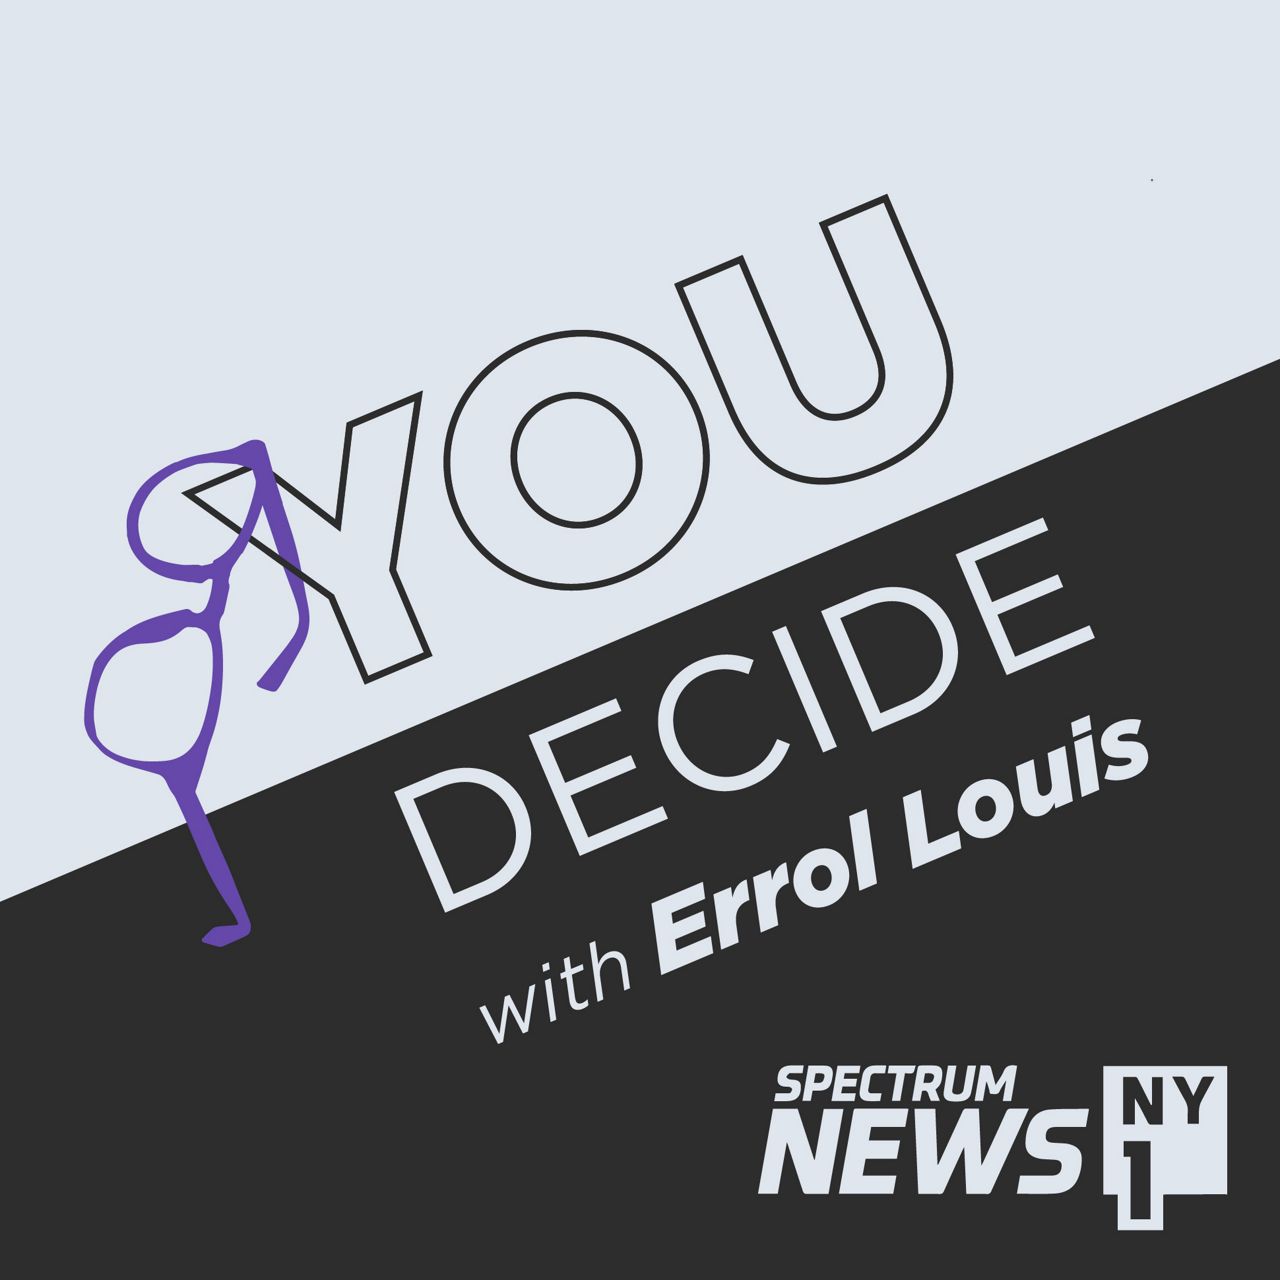 You Decide with Errol Louis podcast logo